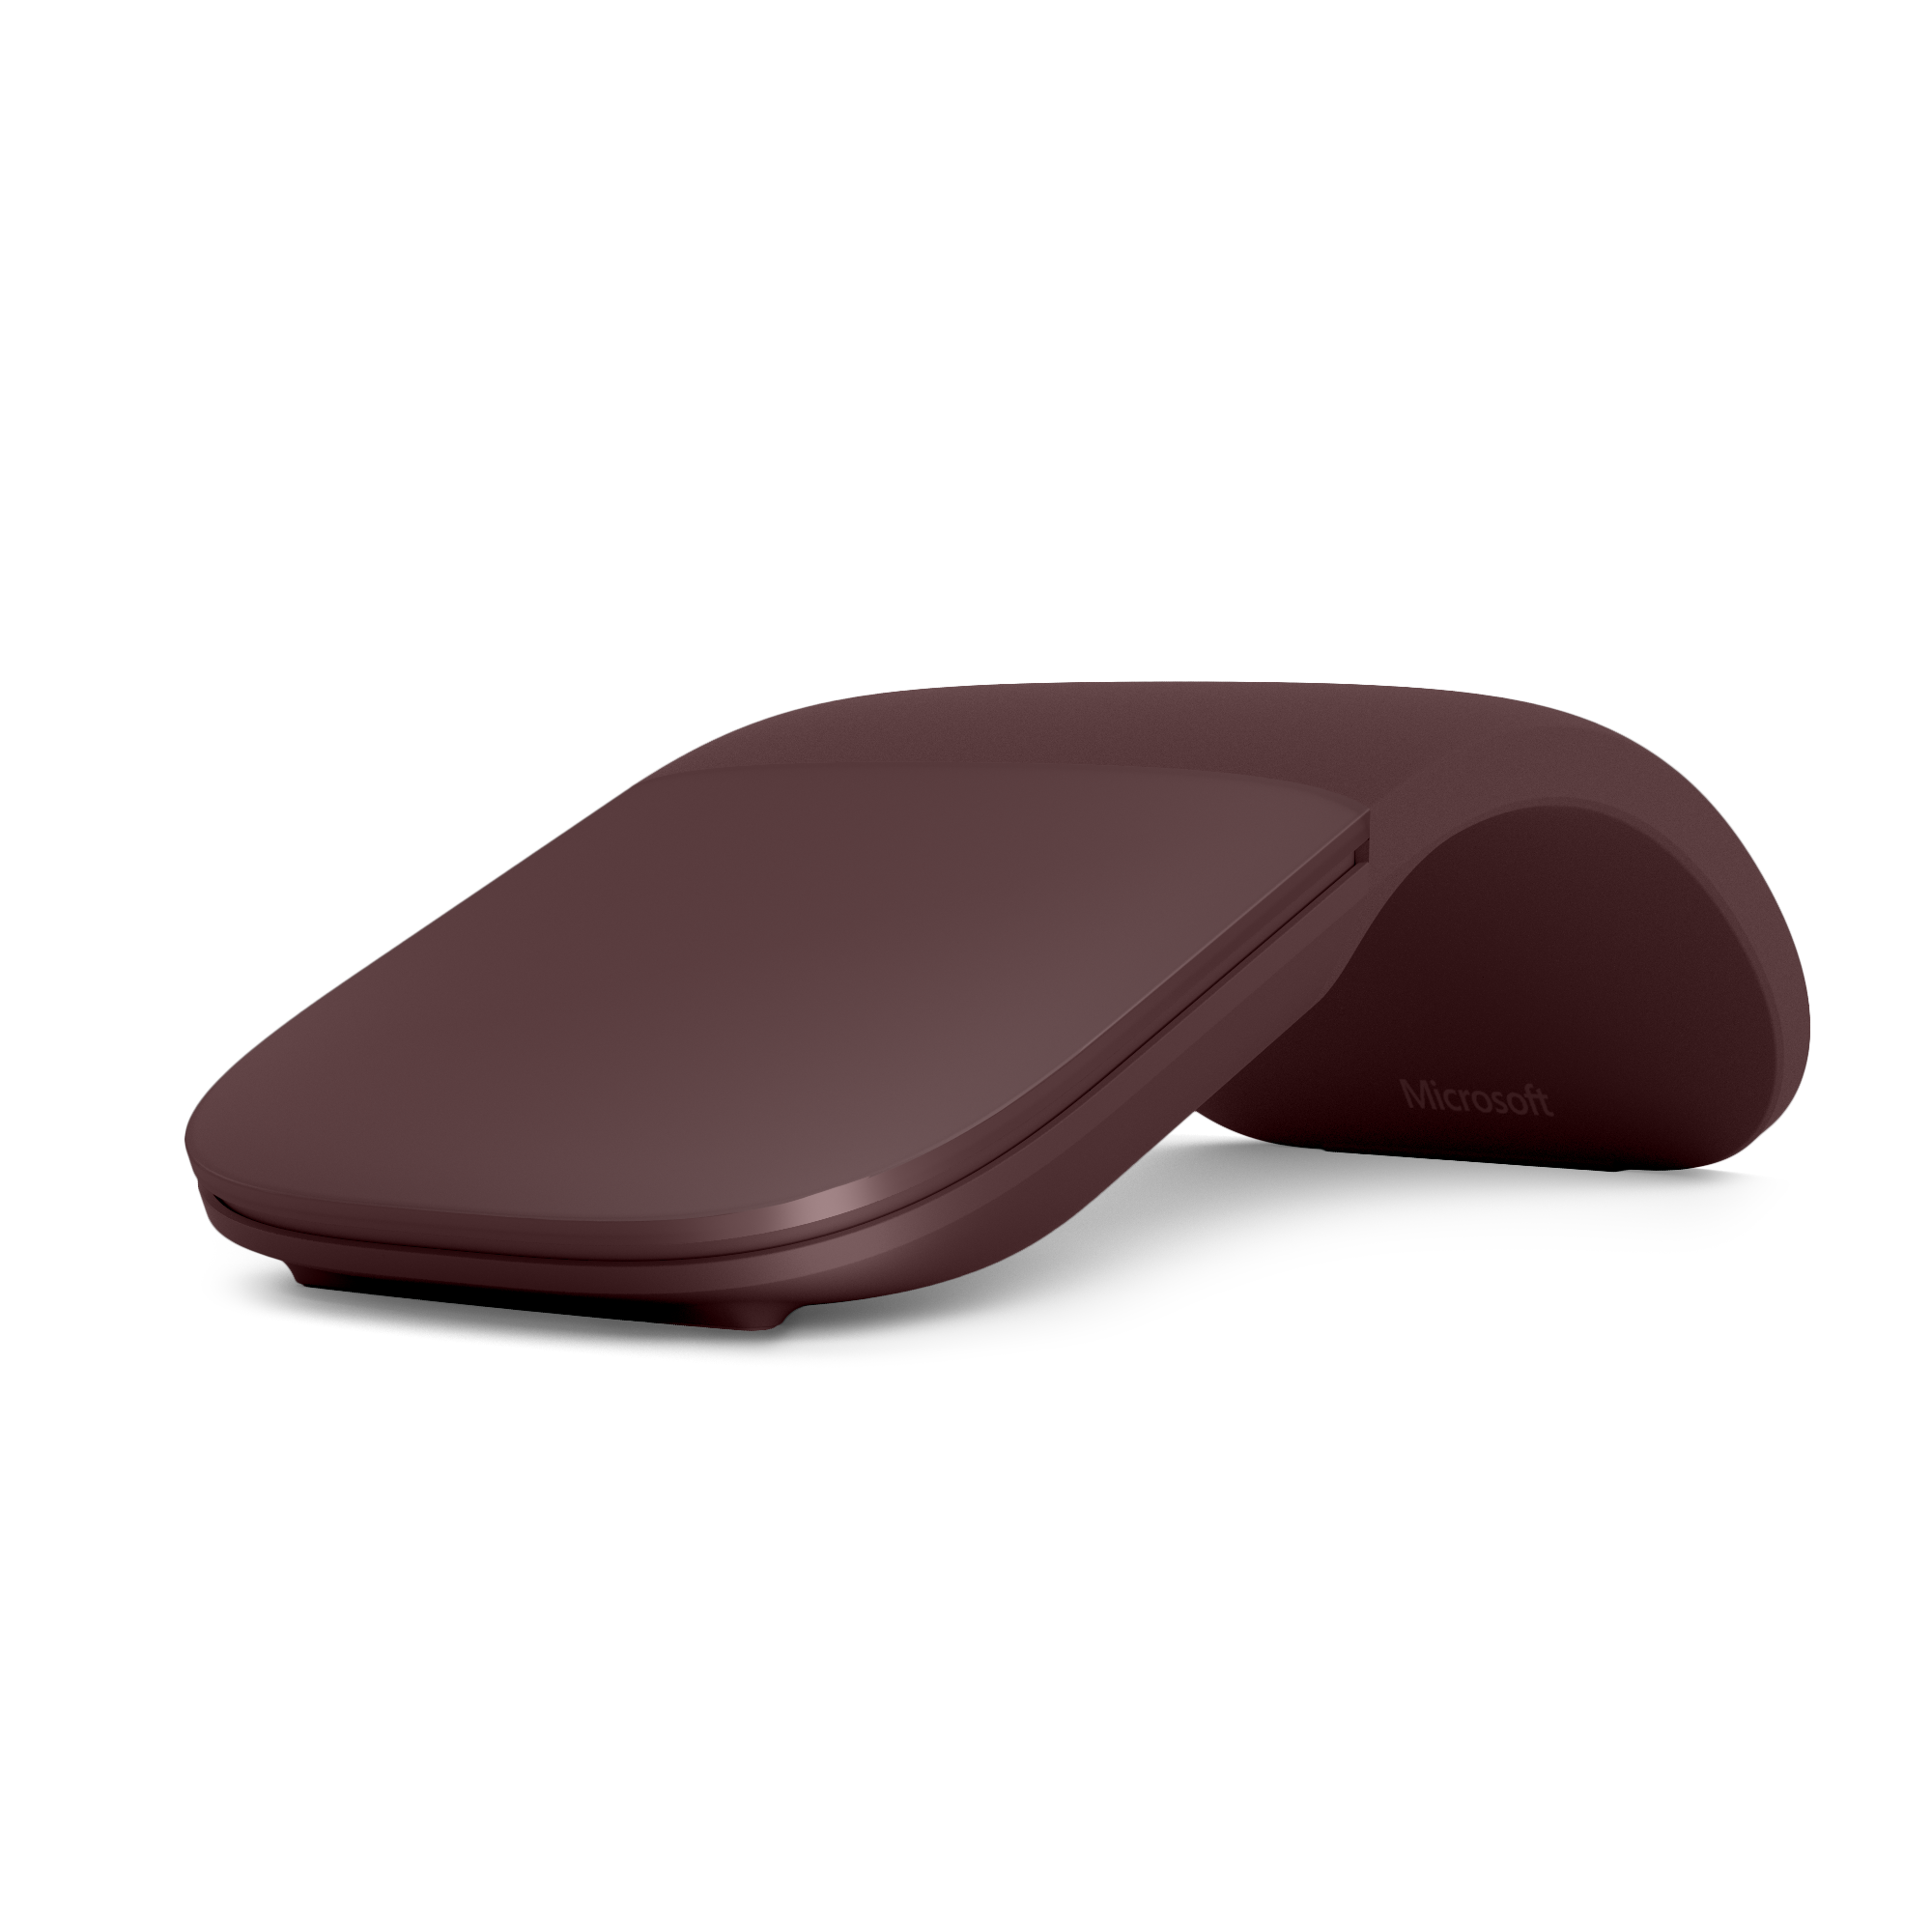 Microsoft Surface Arc Mouse in Burgundy, designed to conform to your hand –  #MicrosoftEDU Event